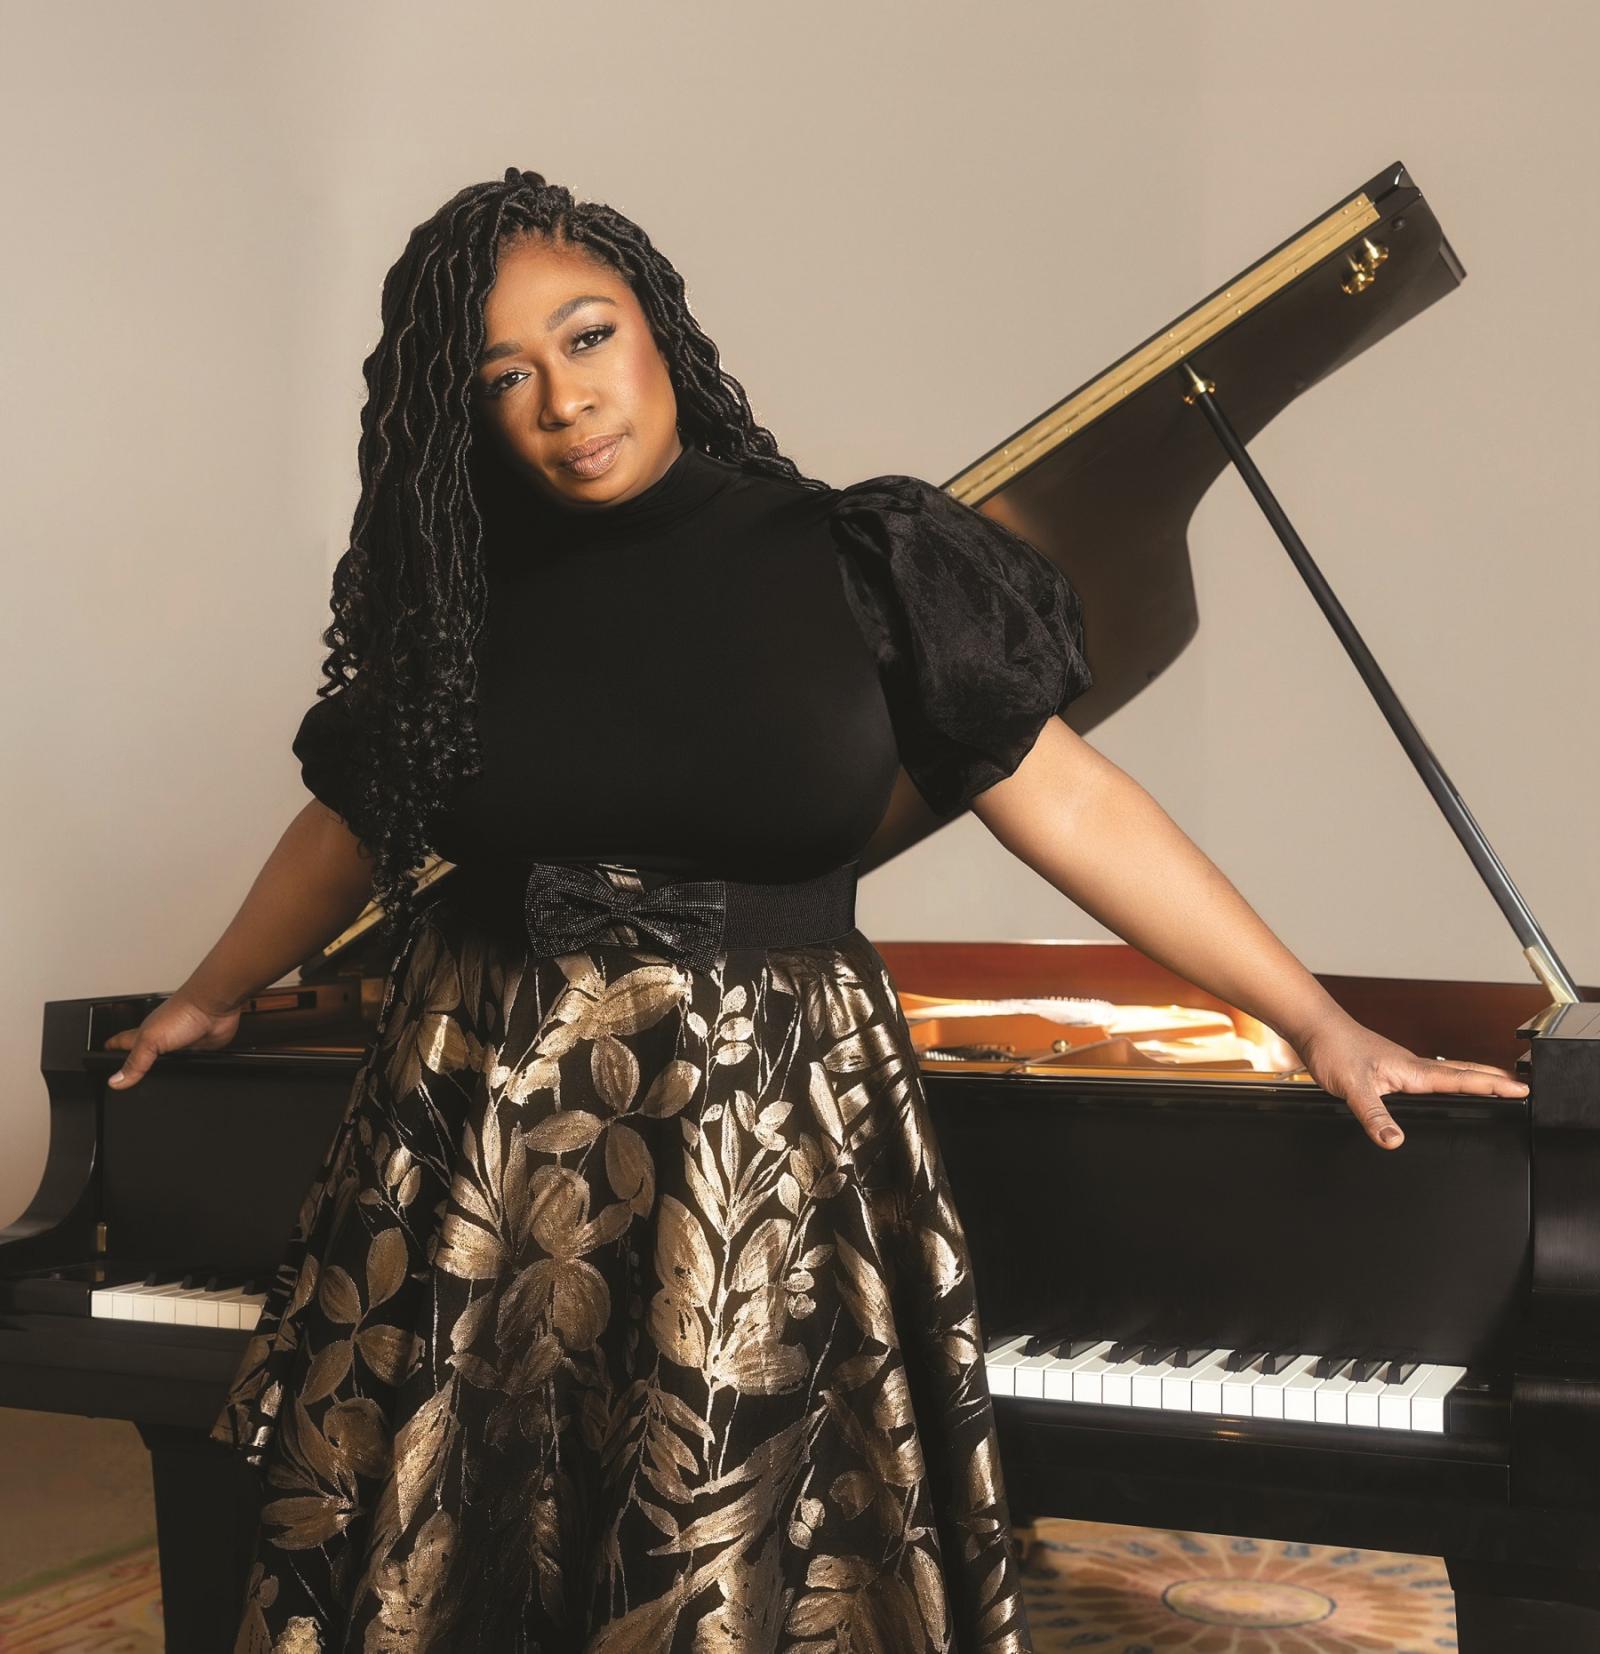 Michelle Cann poses for a photo in front of a piano.